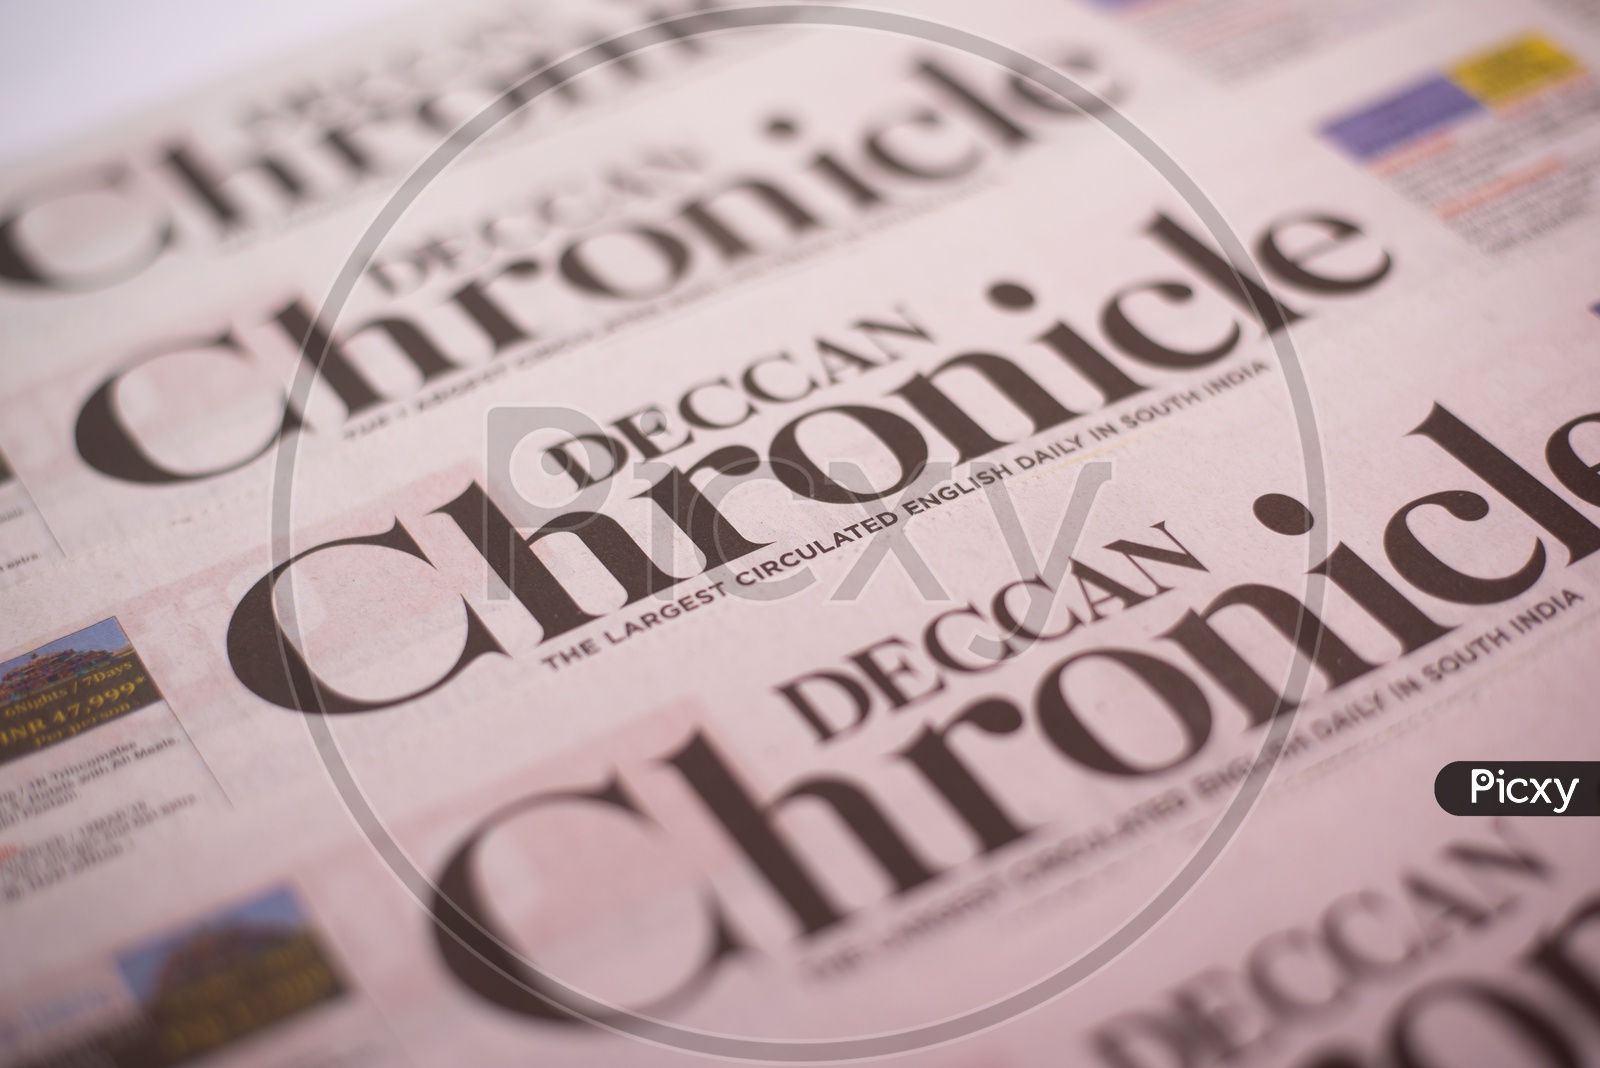 Deccan Chronicle , An English Daily Newspaper in India